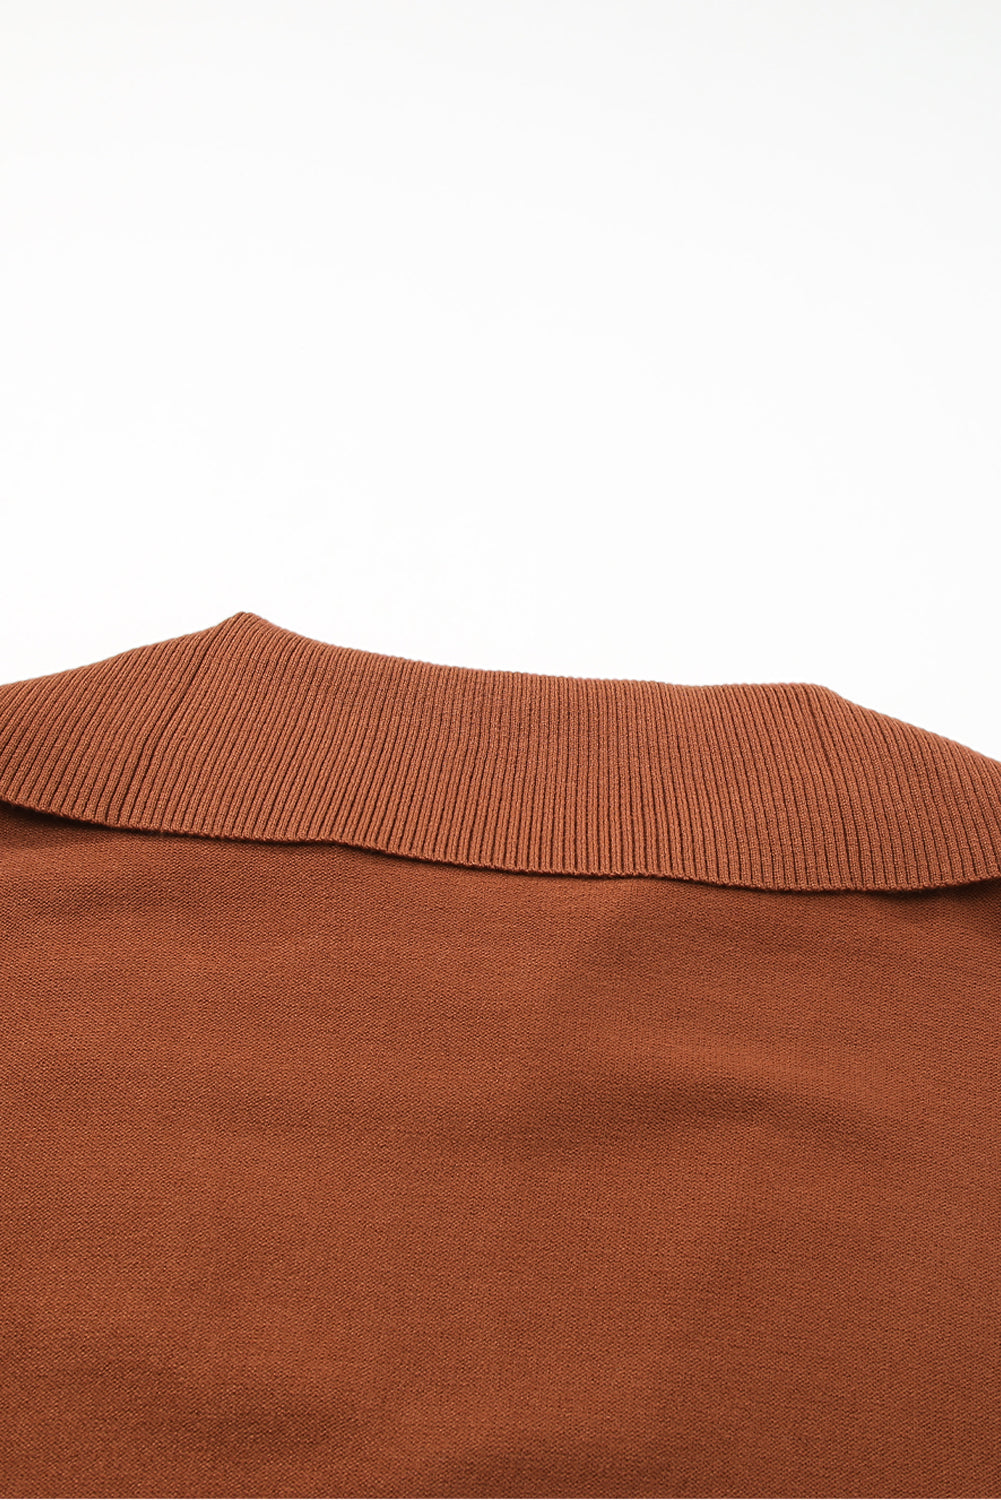 Brown Solid Ribbed Trim Plus Size Zip Collar Sweater